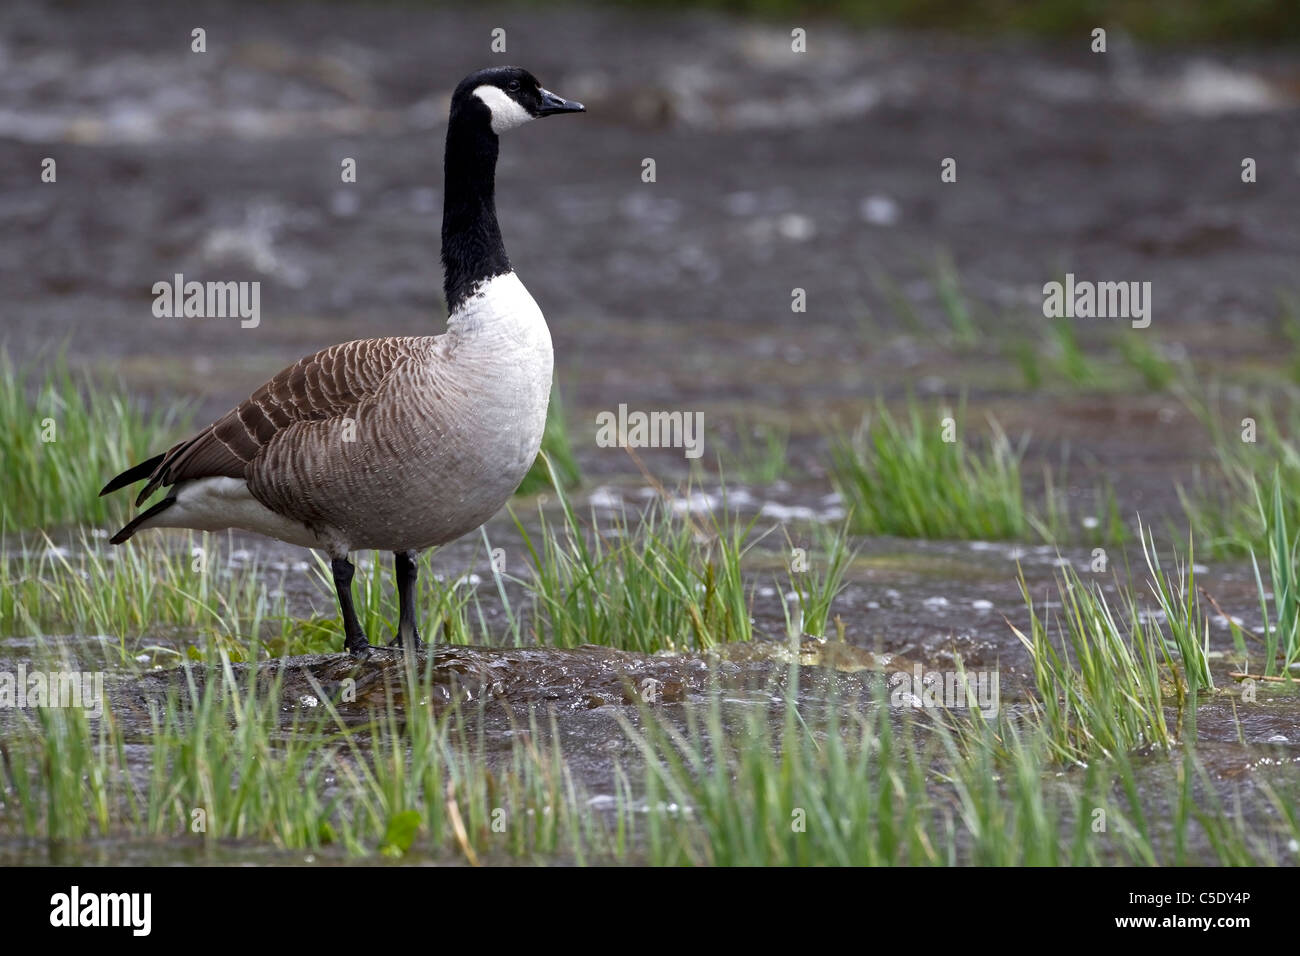 Side shot of a Canada goose standing along by grass Stock Photo